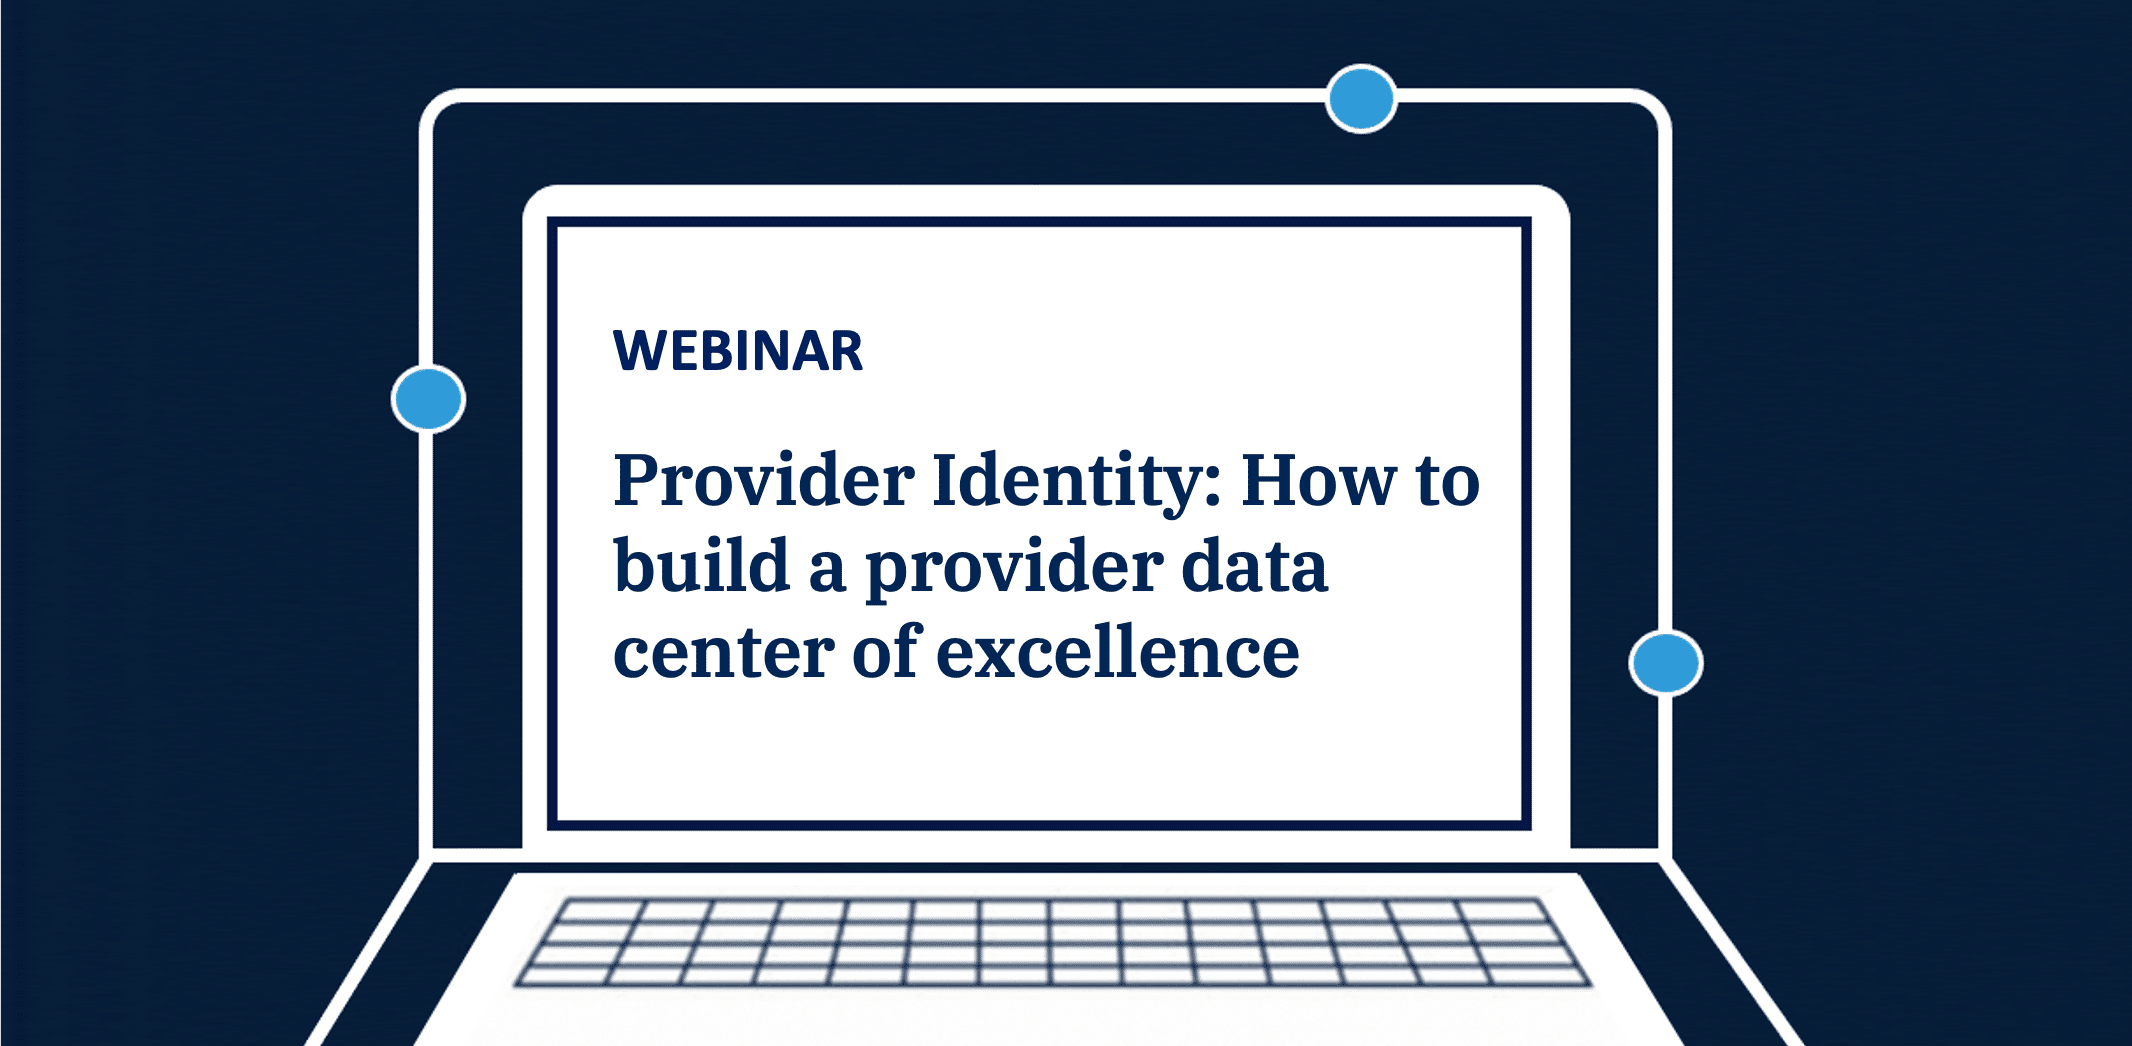 Provider Identity: How to build a provider data center of excellence